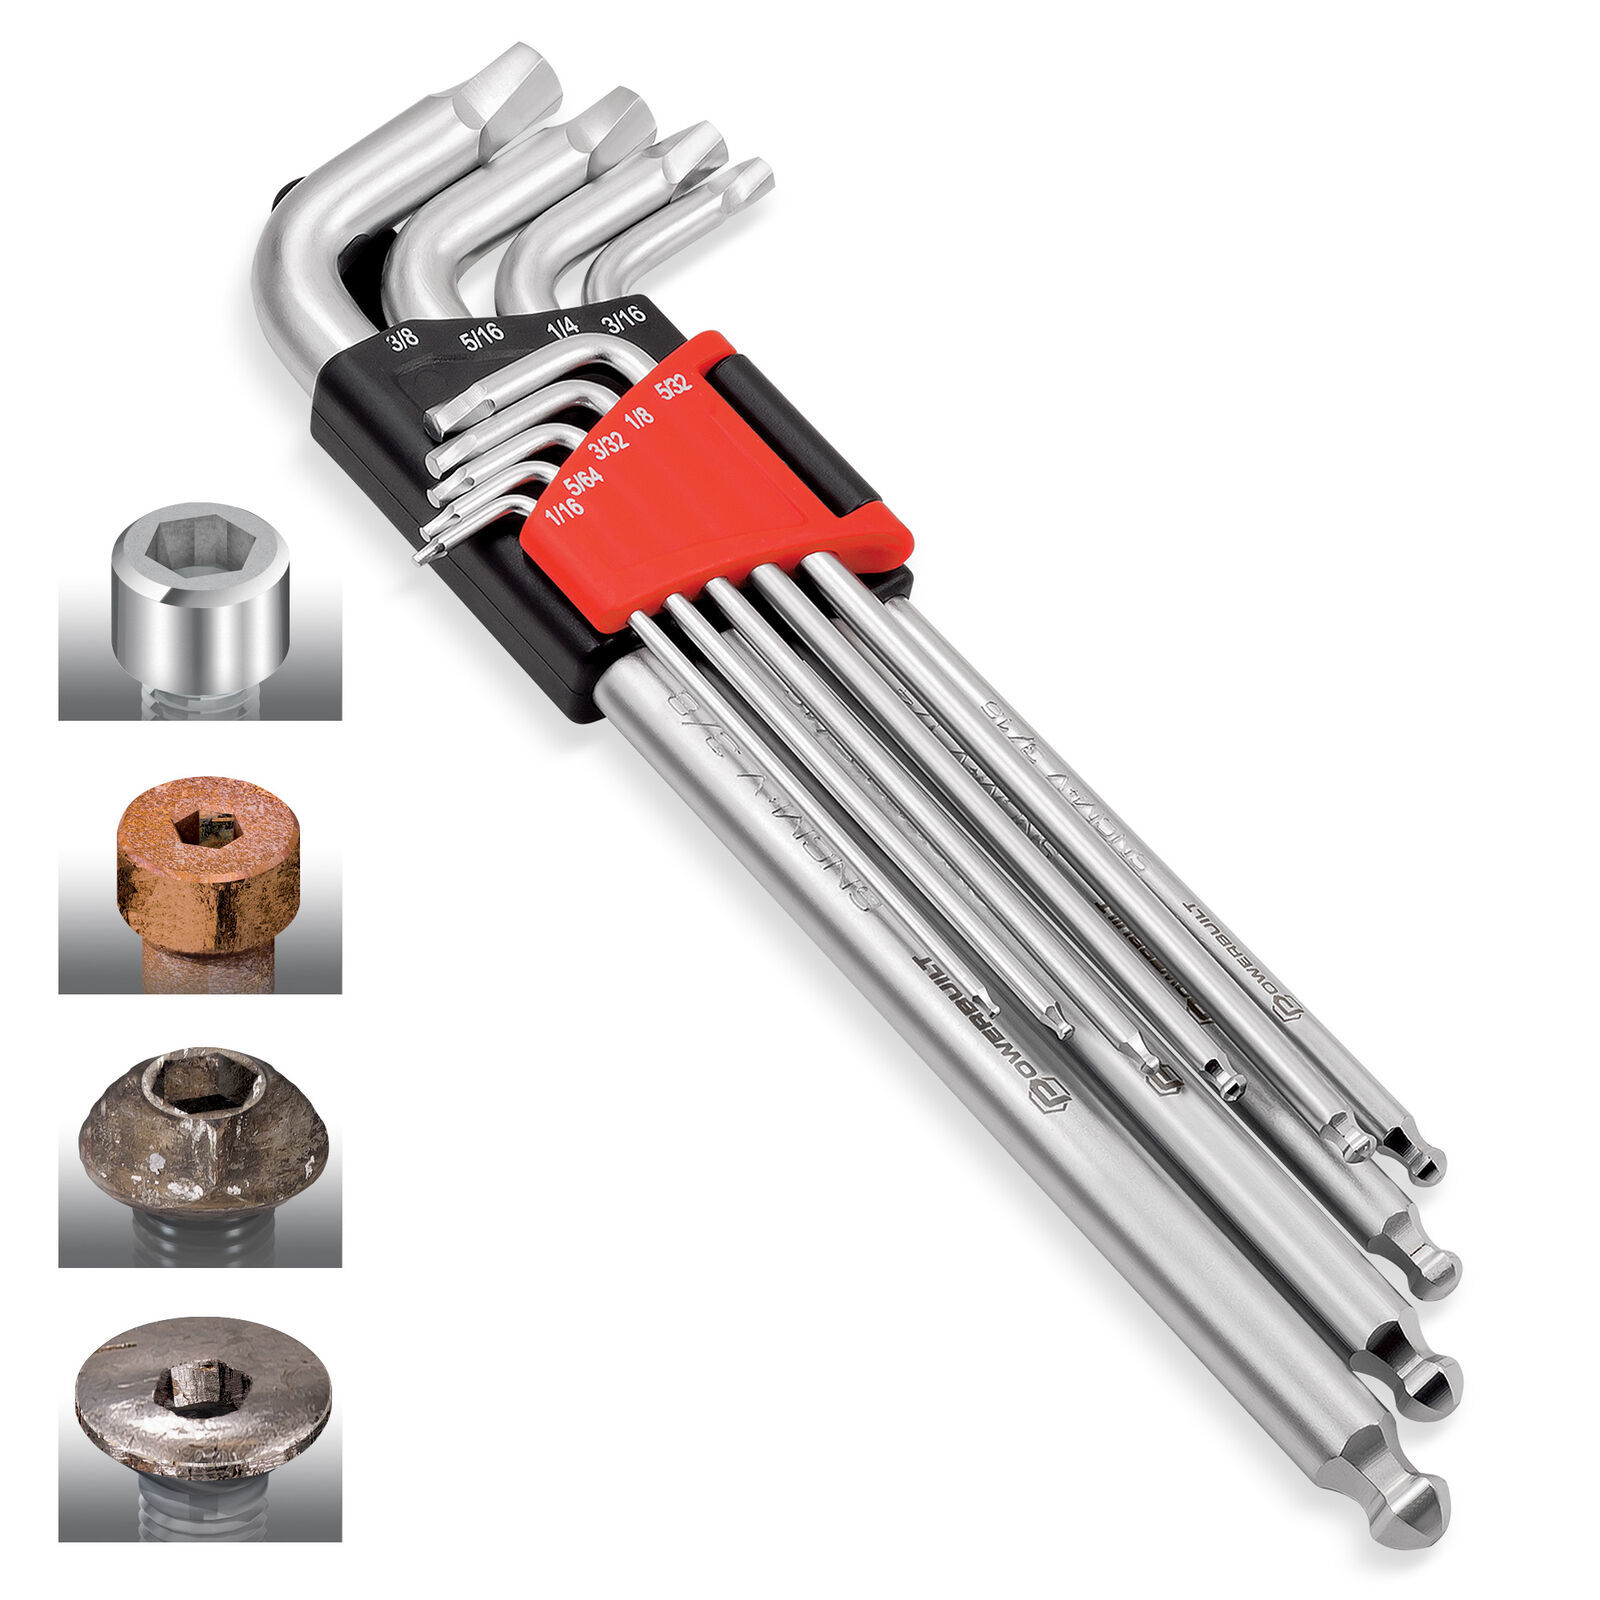 Powerbuilt 9 Piece Zeon SAE Hex Key Wrench Set for Damaged Fasteners - 240096 - $61.74